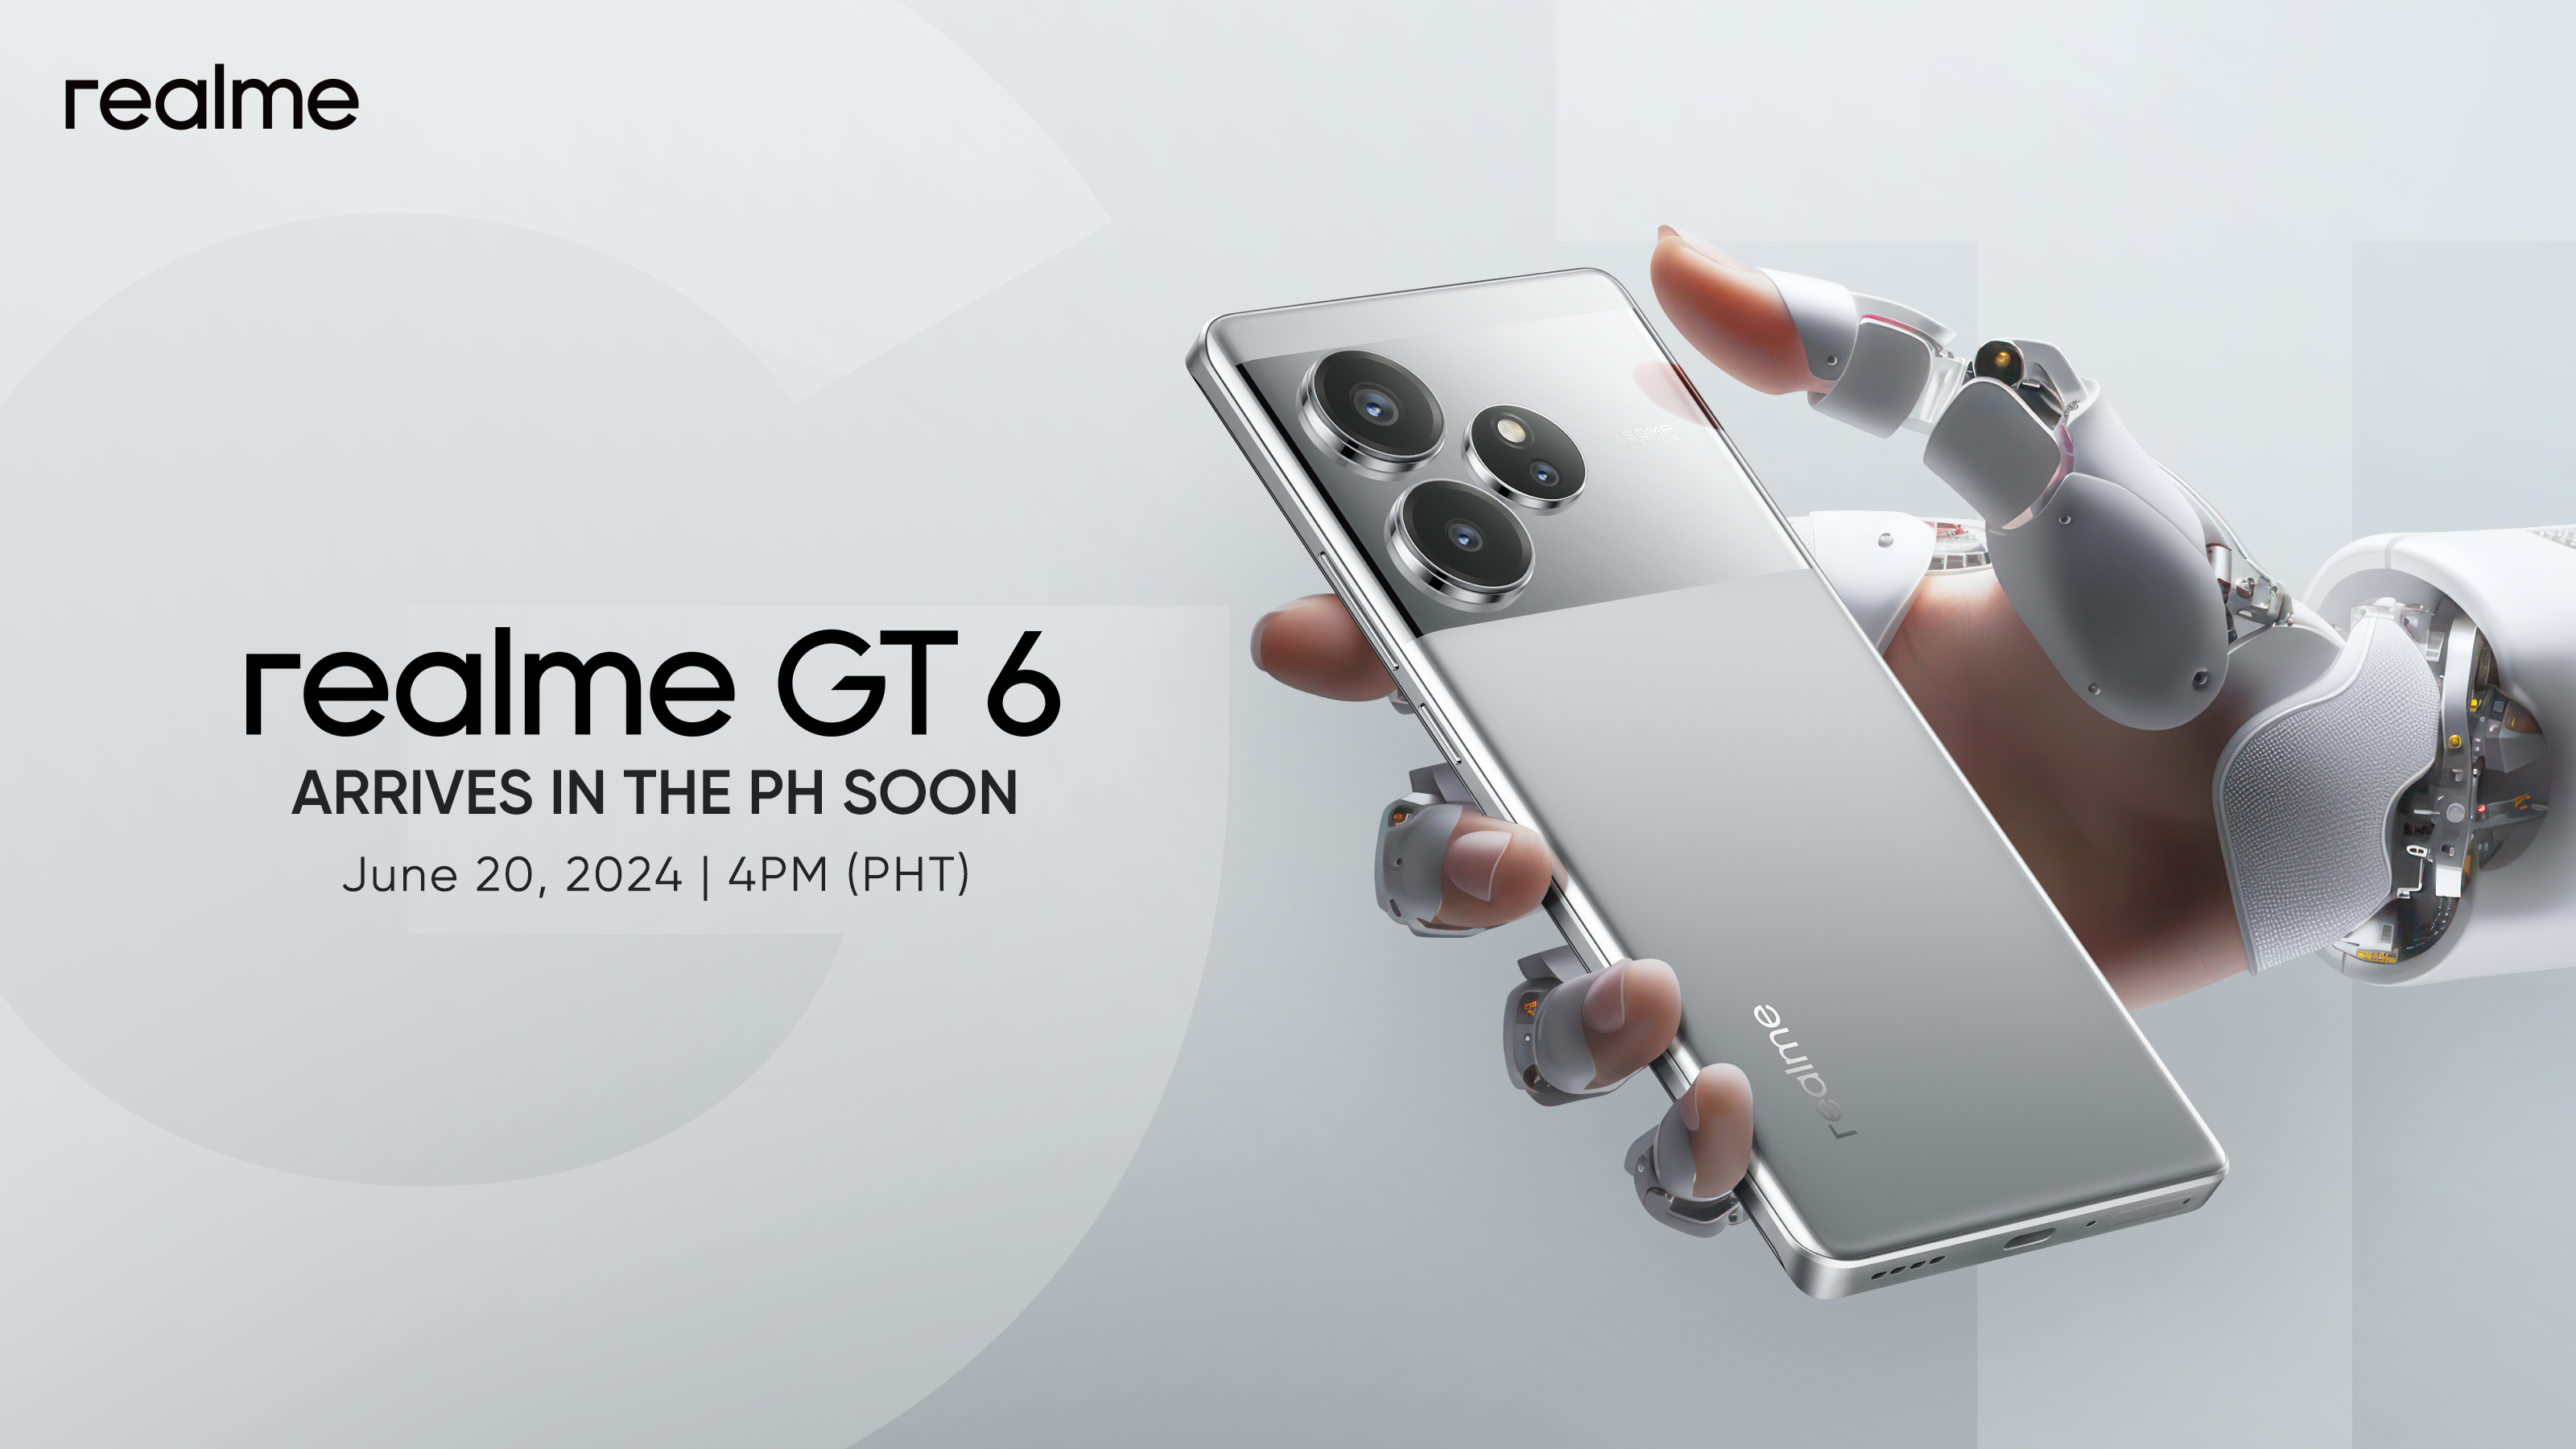 CONFIRMED: realme’s New Flagship Killer GT 6 Launches in PH alongside Global